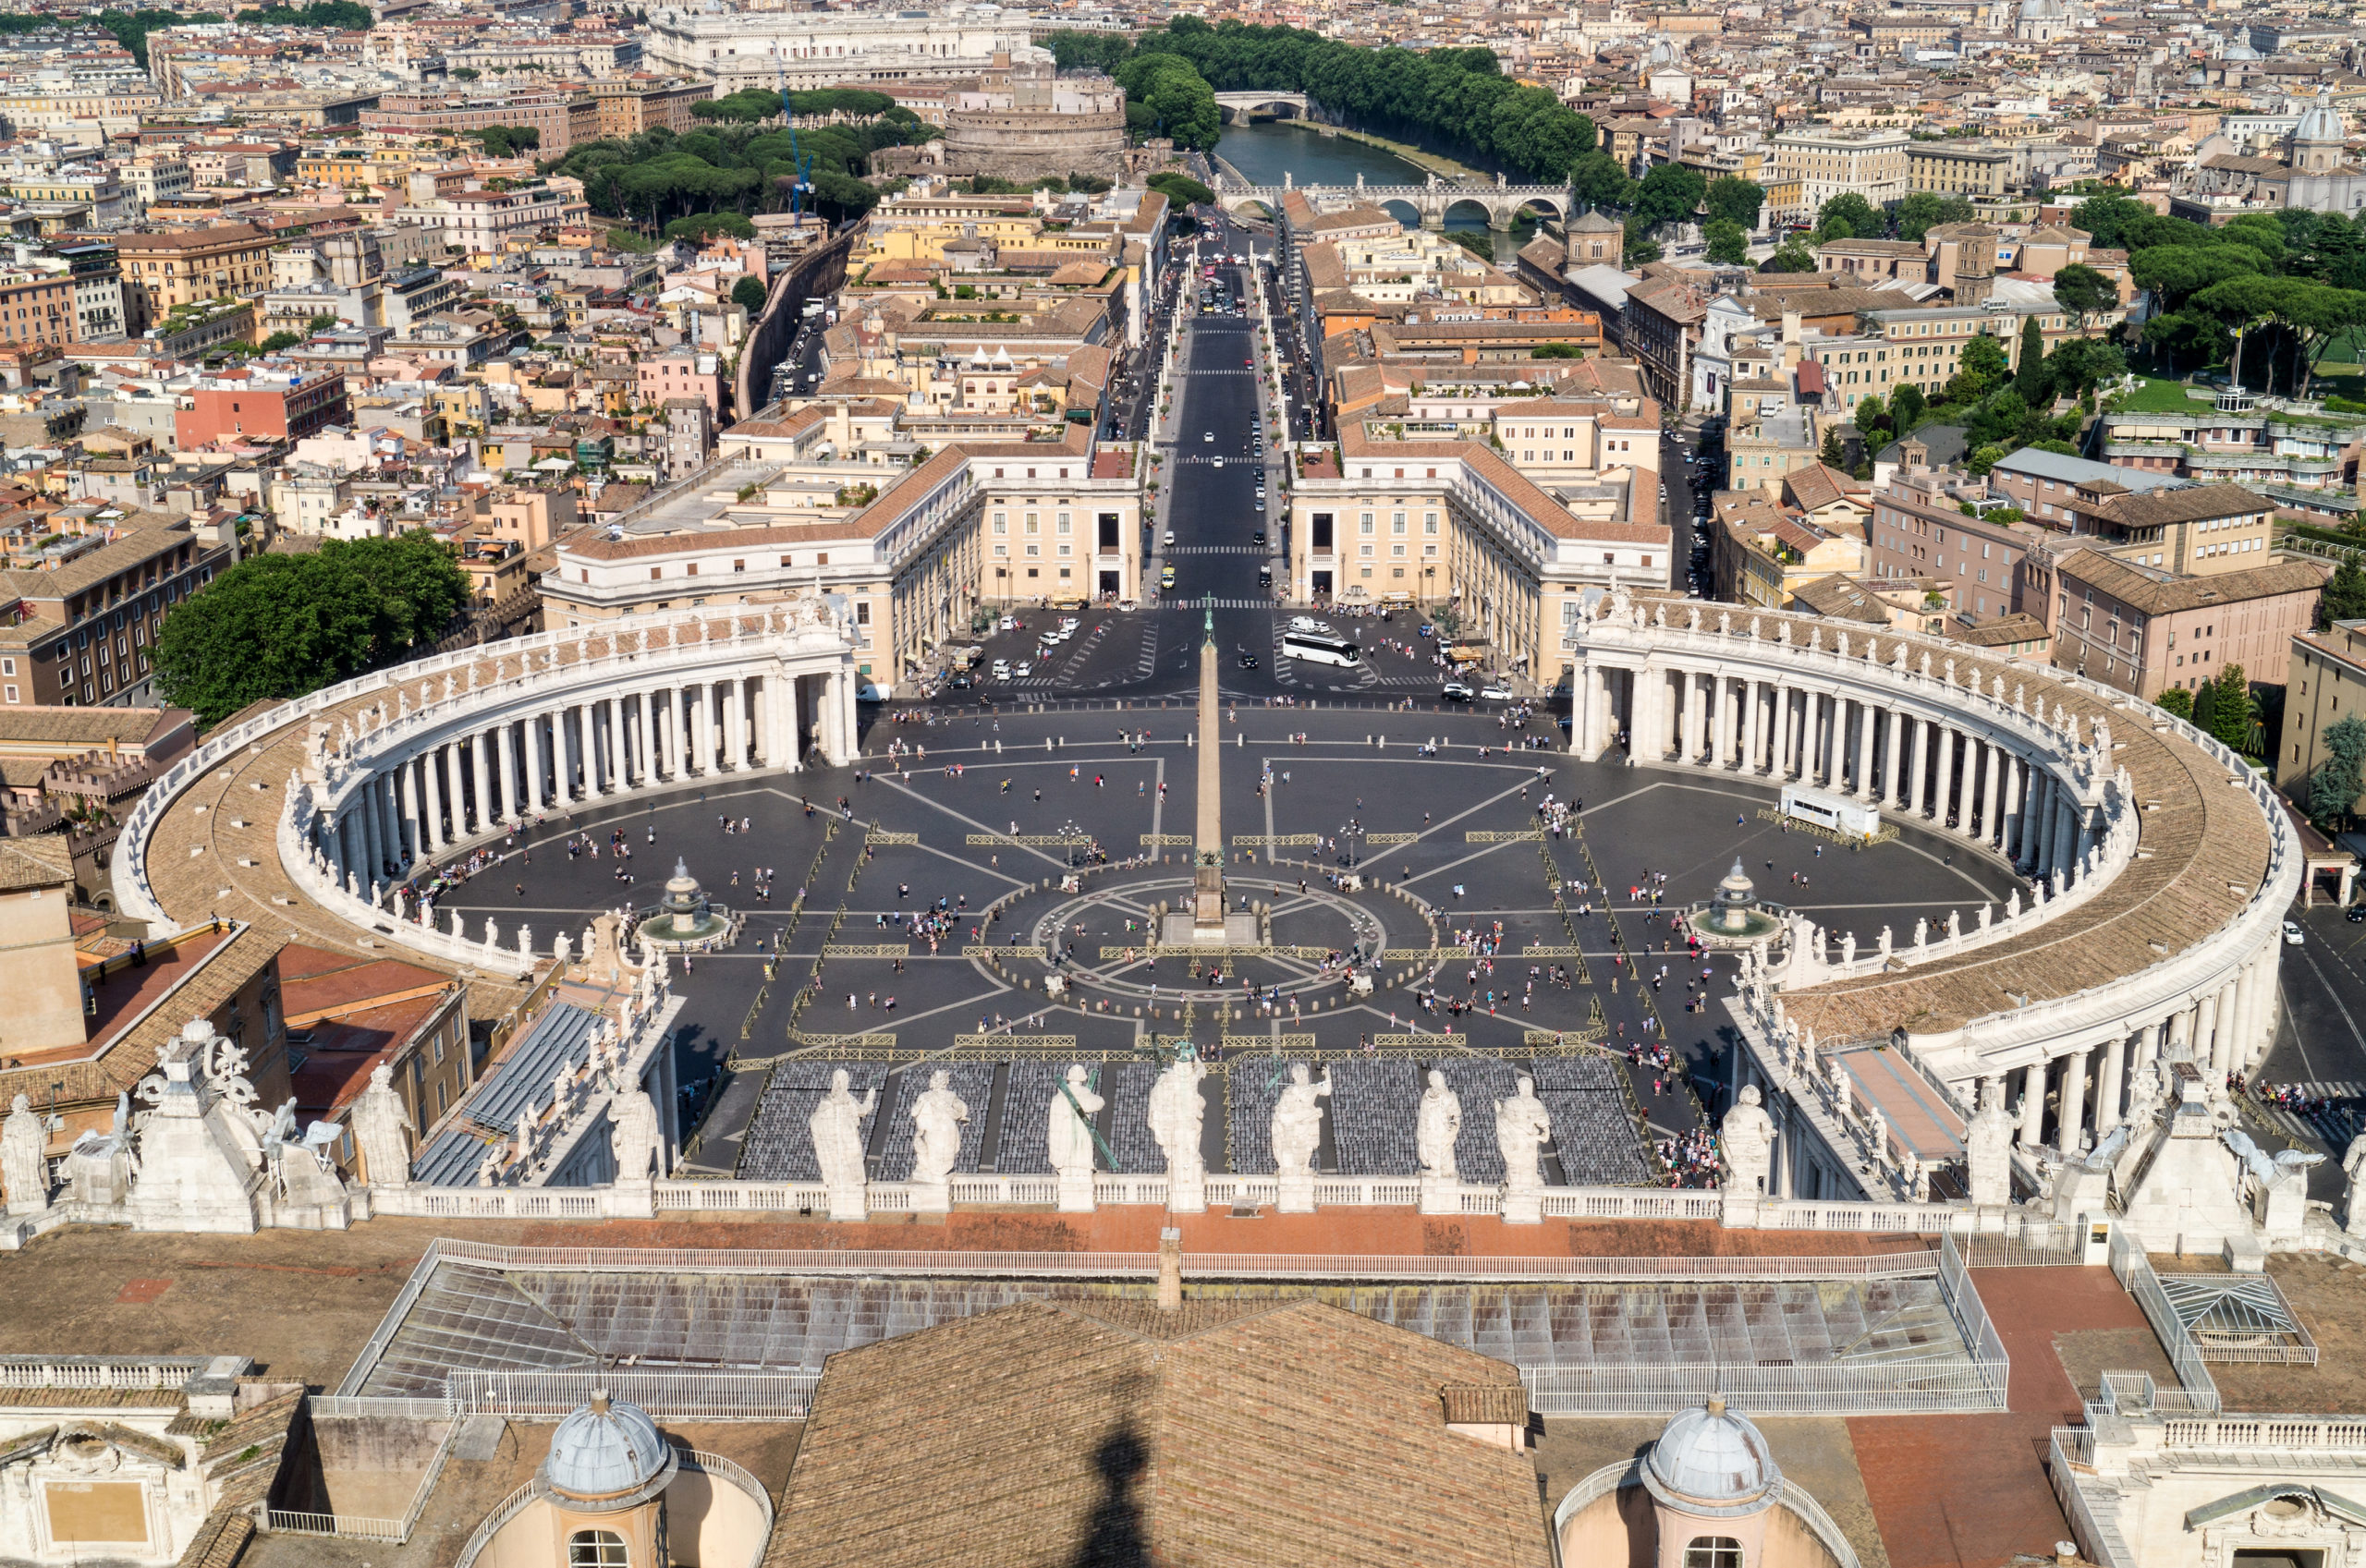 View of St Peter's Square from the roof of St Peter's Basilica,